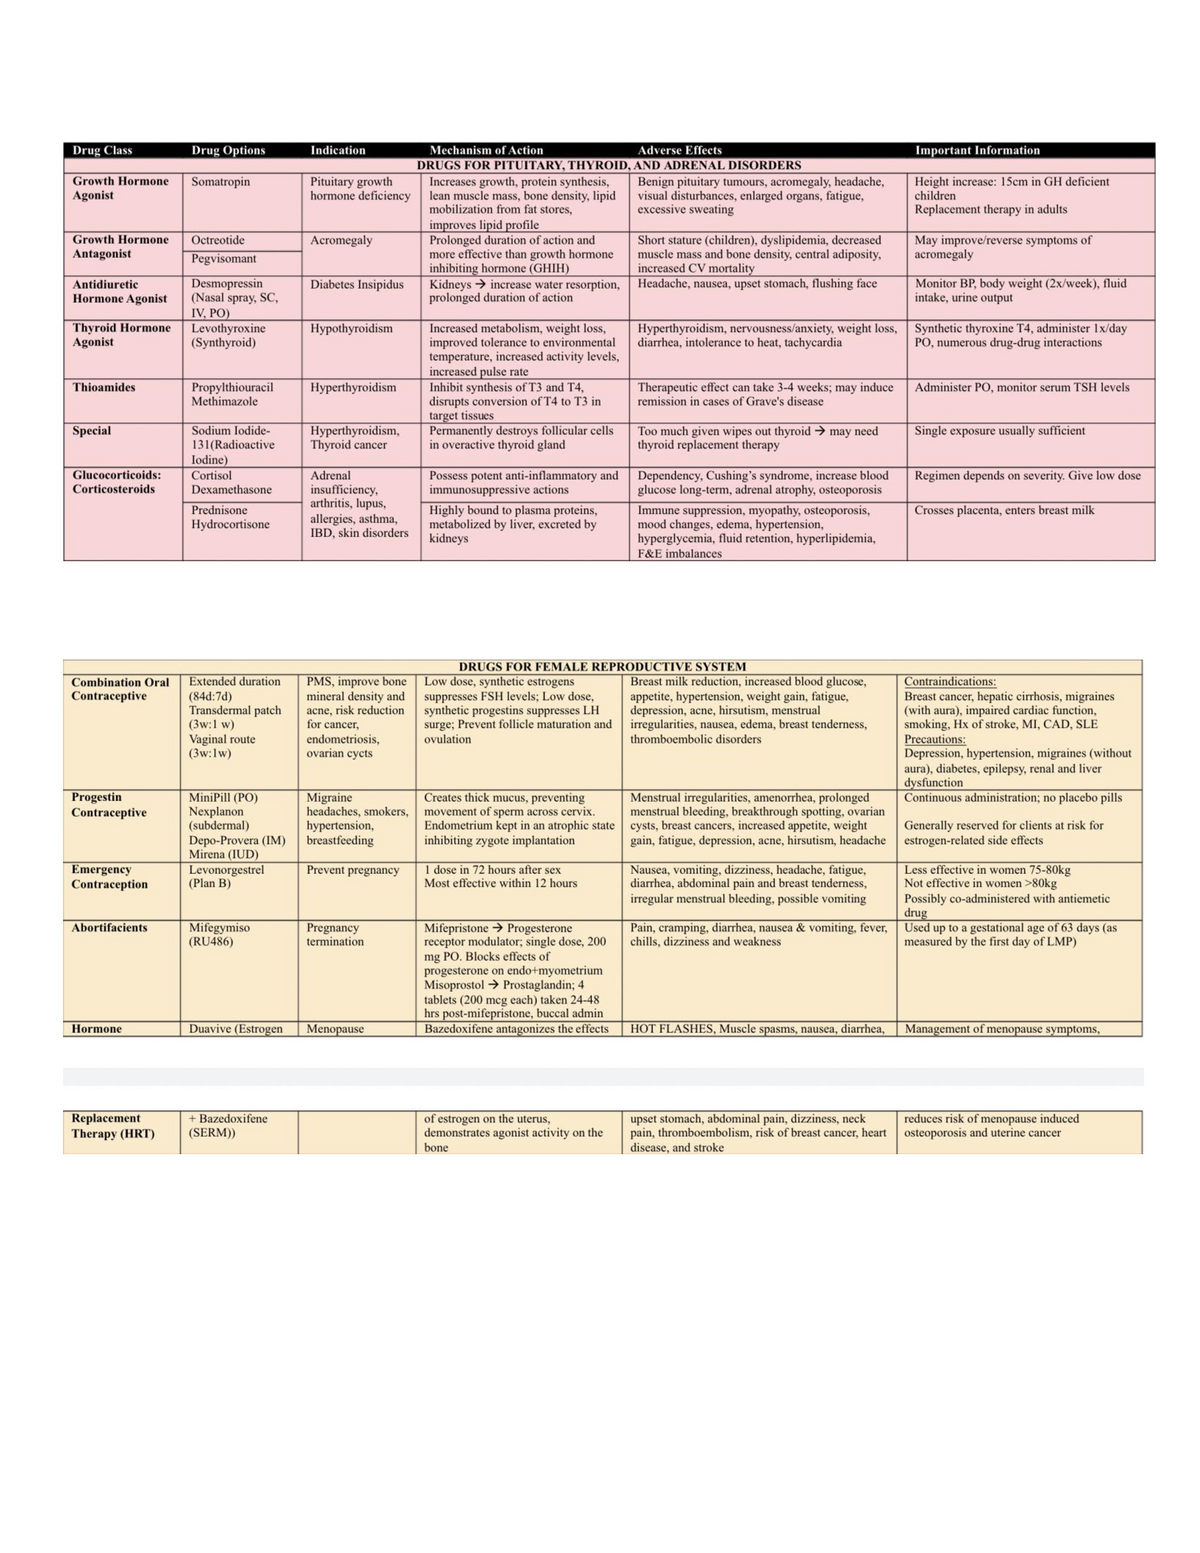 29 Printable Drug Classification Chart Forms And Temp - vrogue.co